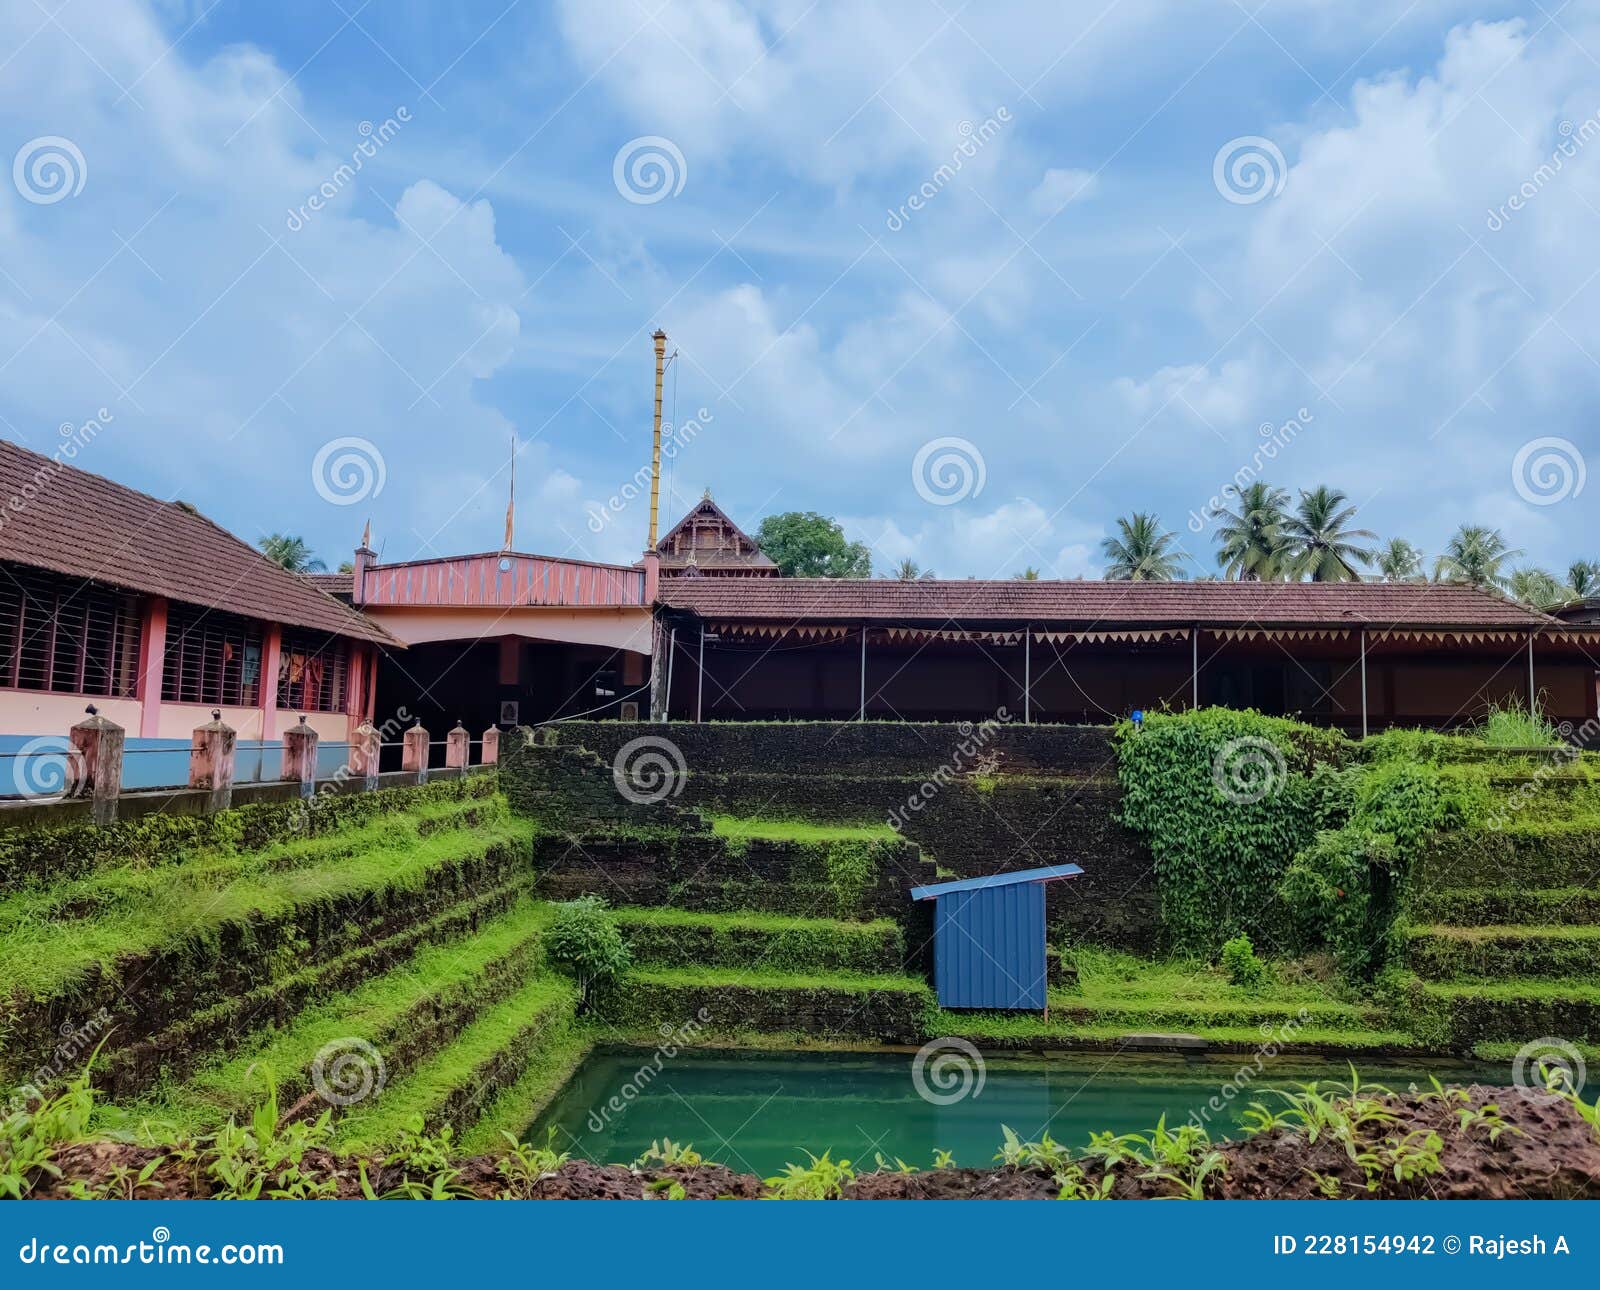 Kasaragod Kerala India July Ancient Kerala Temple Adoor Temple Architecture Design View Near Pond Under Blue Sky Ancient 228154942 